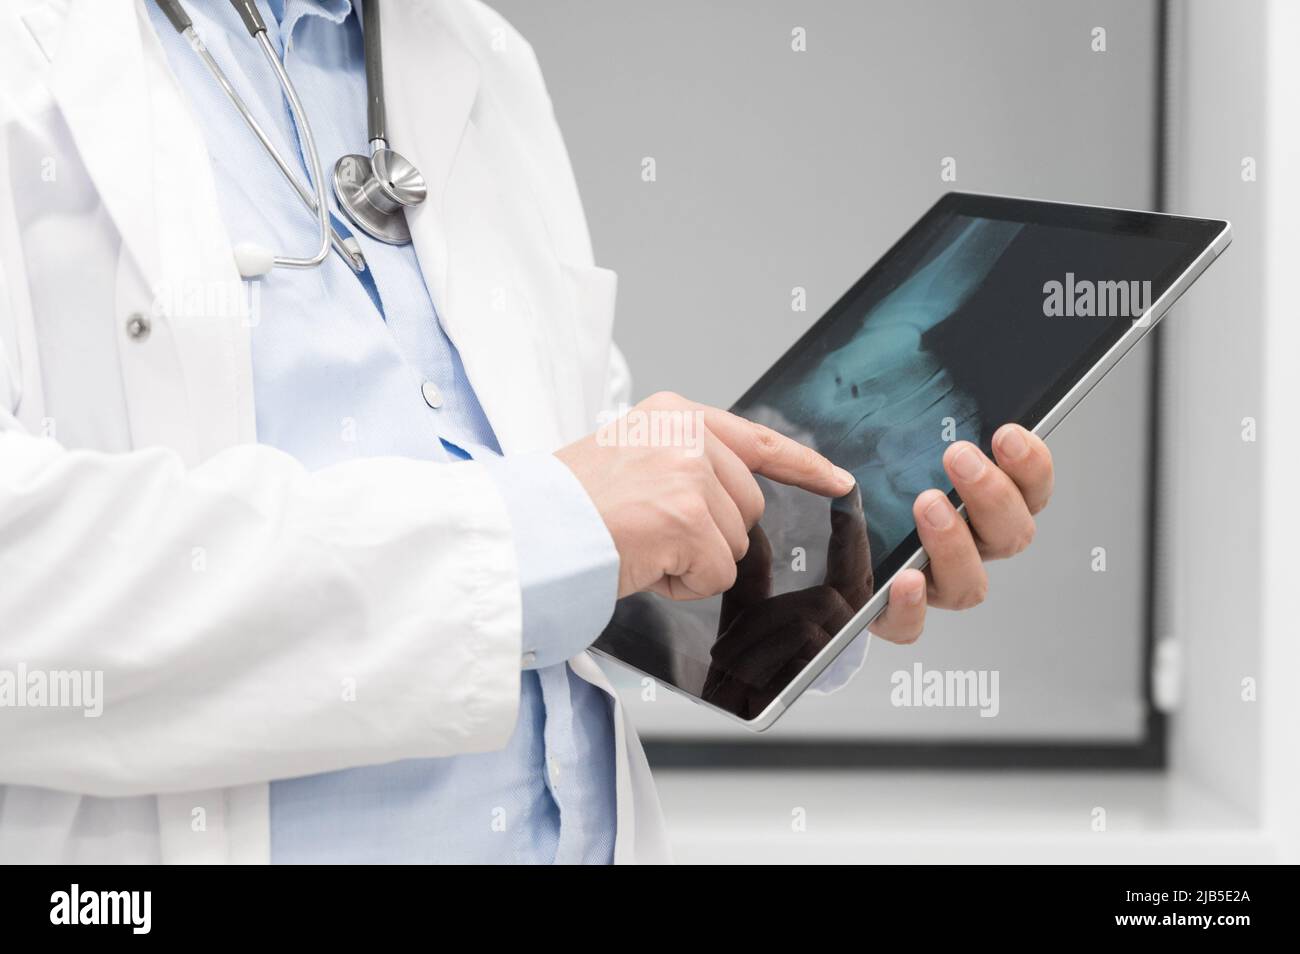 Unrecognizable Doctor is checking x-ray image at computer tablet, close up. Doctor at work in a hospital. Medicine and healthcare concept. High Stock Photo